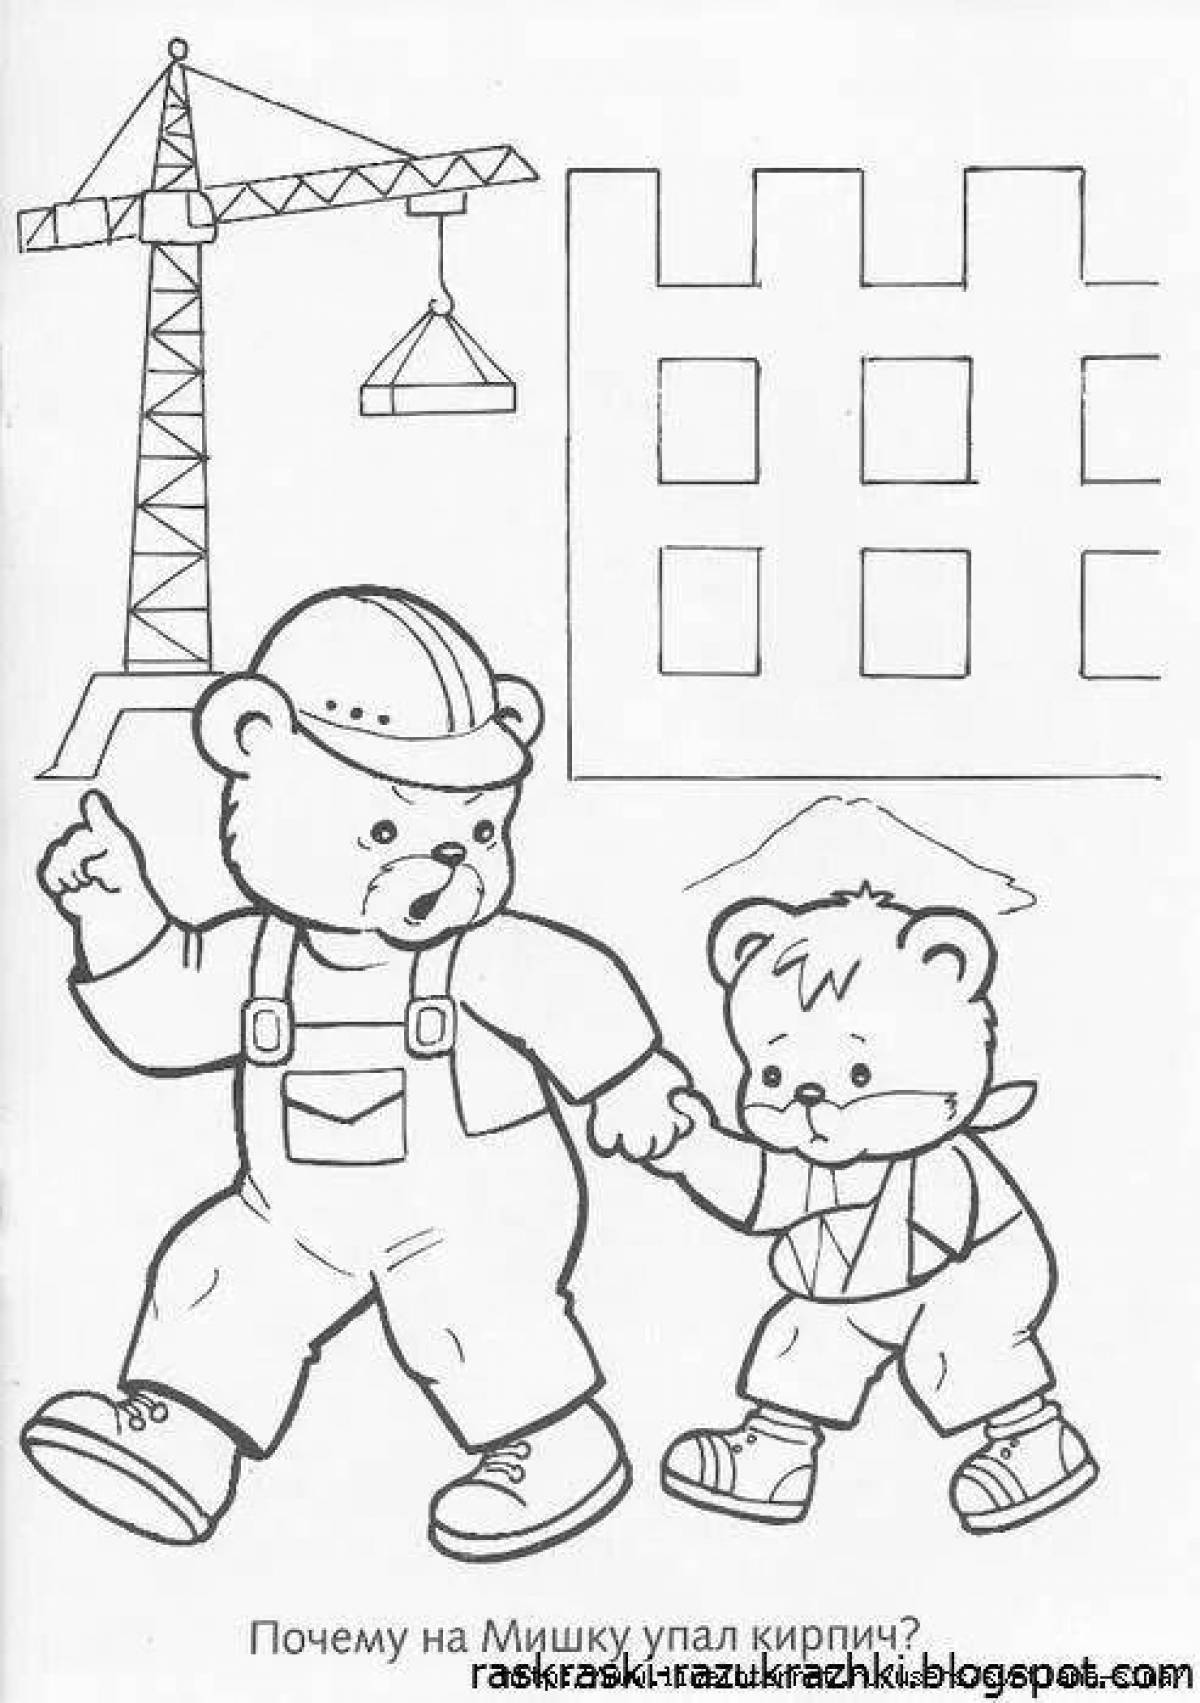 Occupational safety drawings through the eyes of children #6